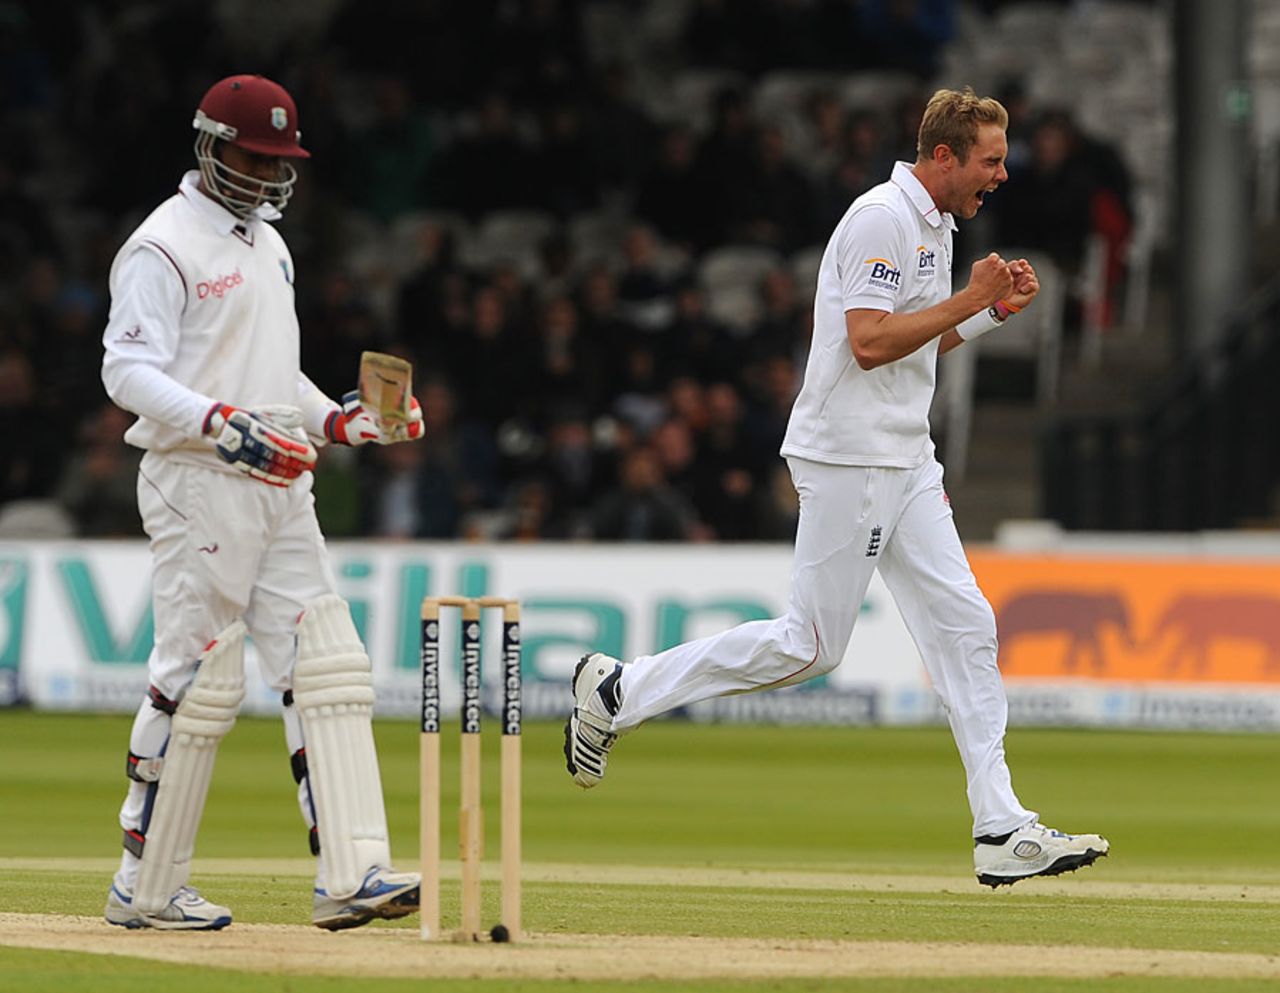 Stuart Broad removed Marlon Samuels with the second new ball, England v West Indies, 1st Test, Lord's, 4th day, May 20, 2012